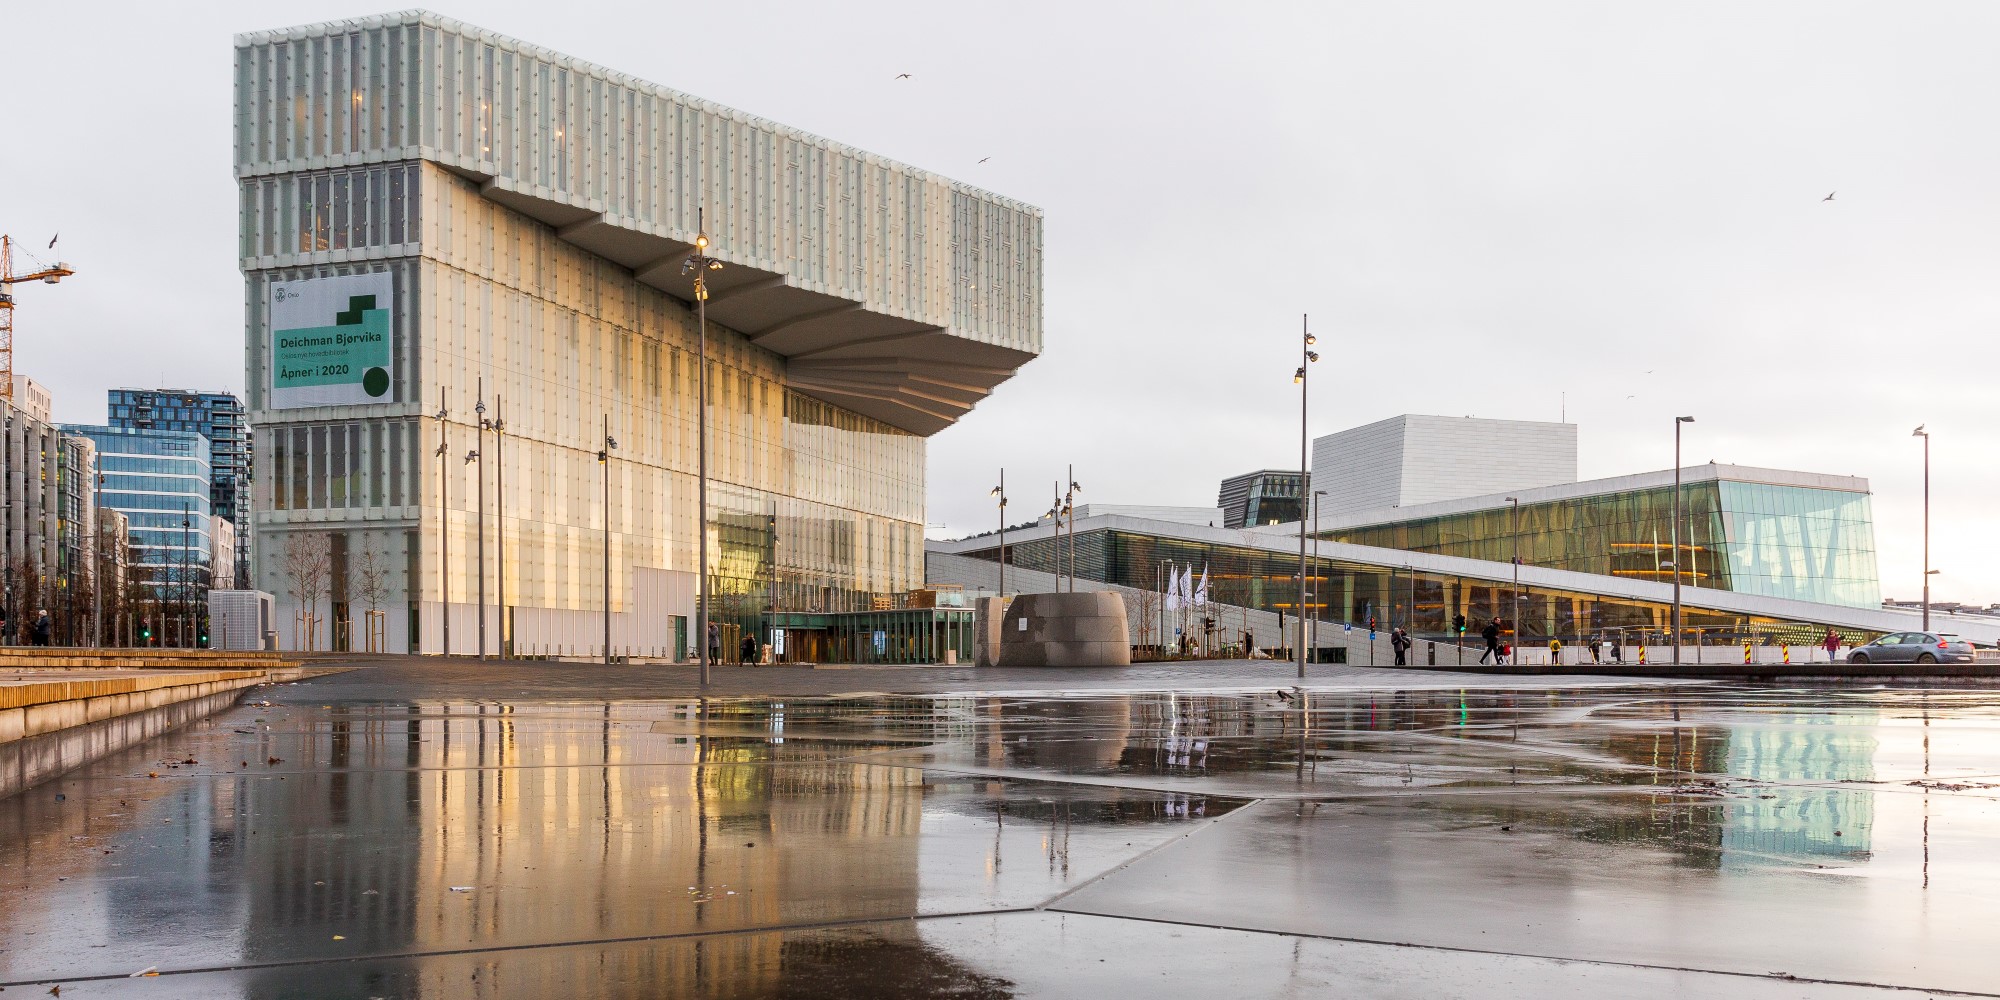 Norway opens new $650 million national art museum complex in Oslo